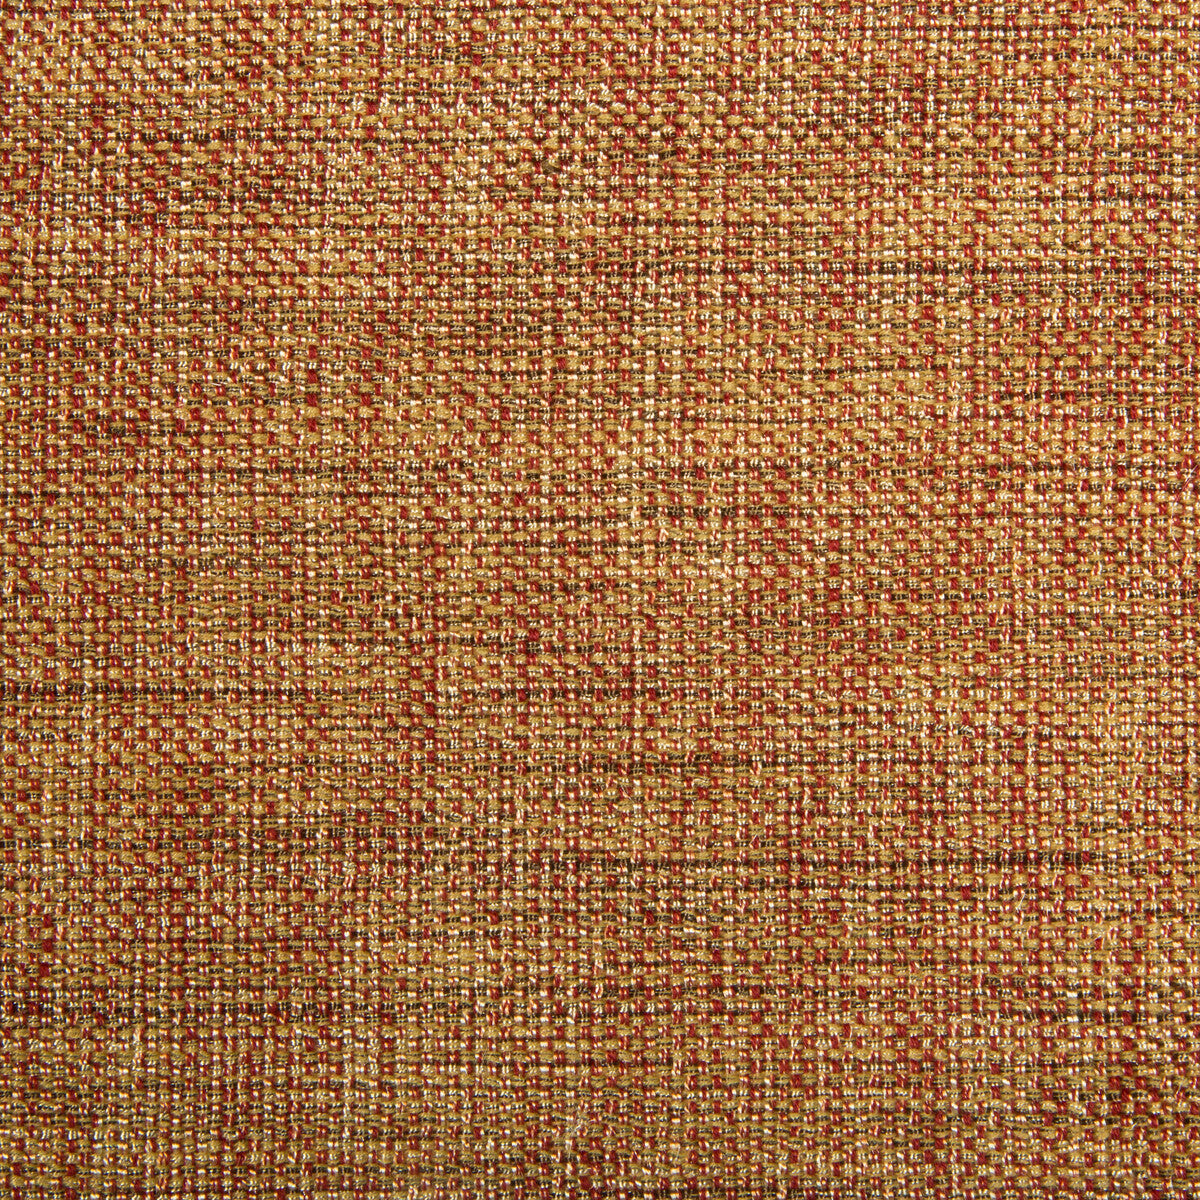 Kravet Contract fabric in 34926-624 color - pattern 34926.624.0 - by Kravet Contract